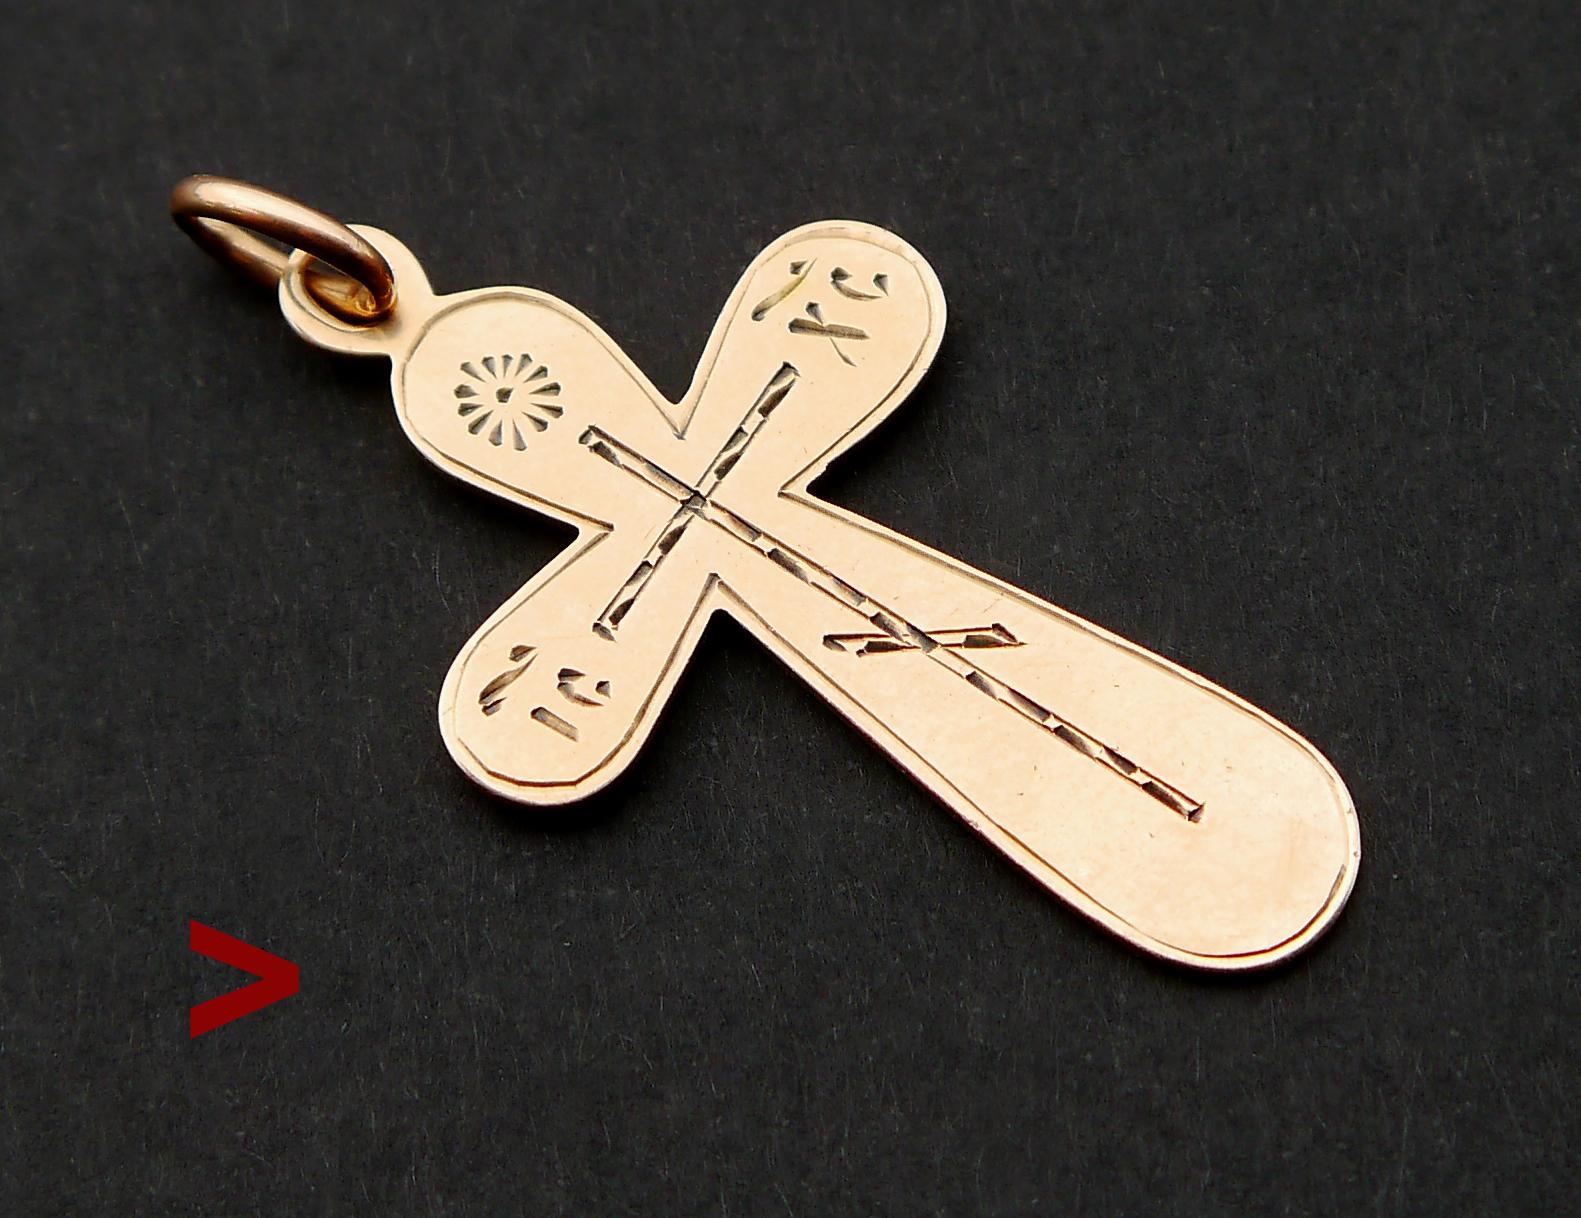 Russian Orthodox Cross pendant in solid 56 / 14K Yellow Gold. Delicate hand - engraved ornament. Engraved inscription on the back side in Russian reads : 